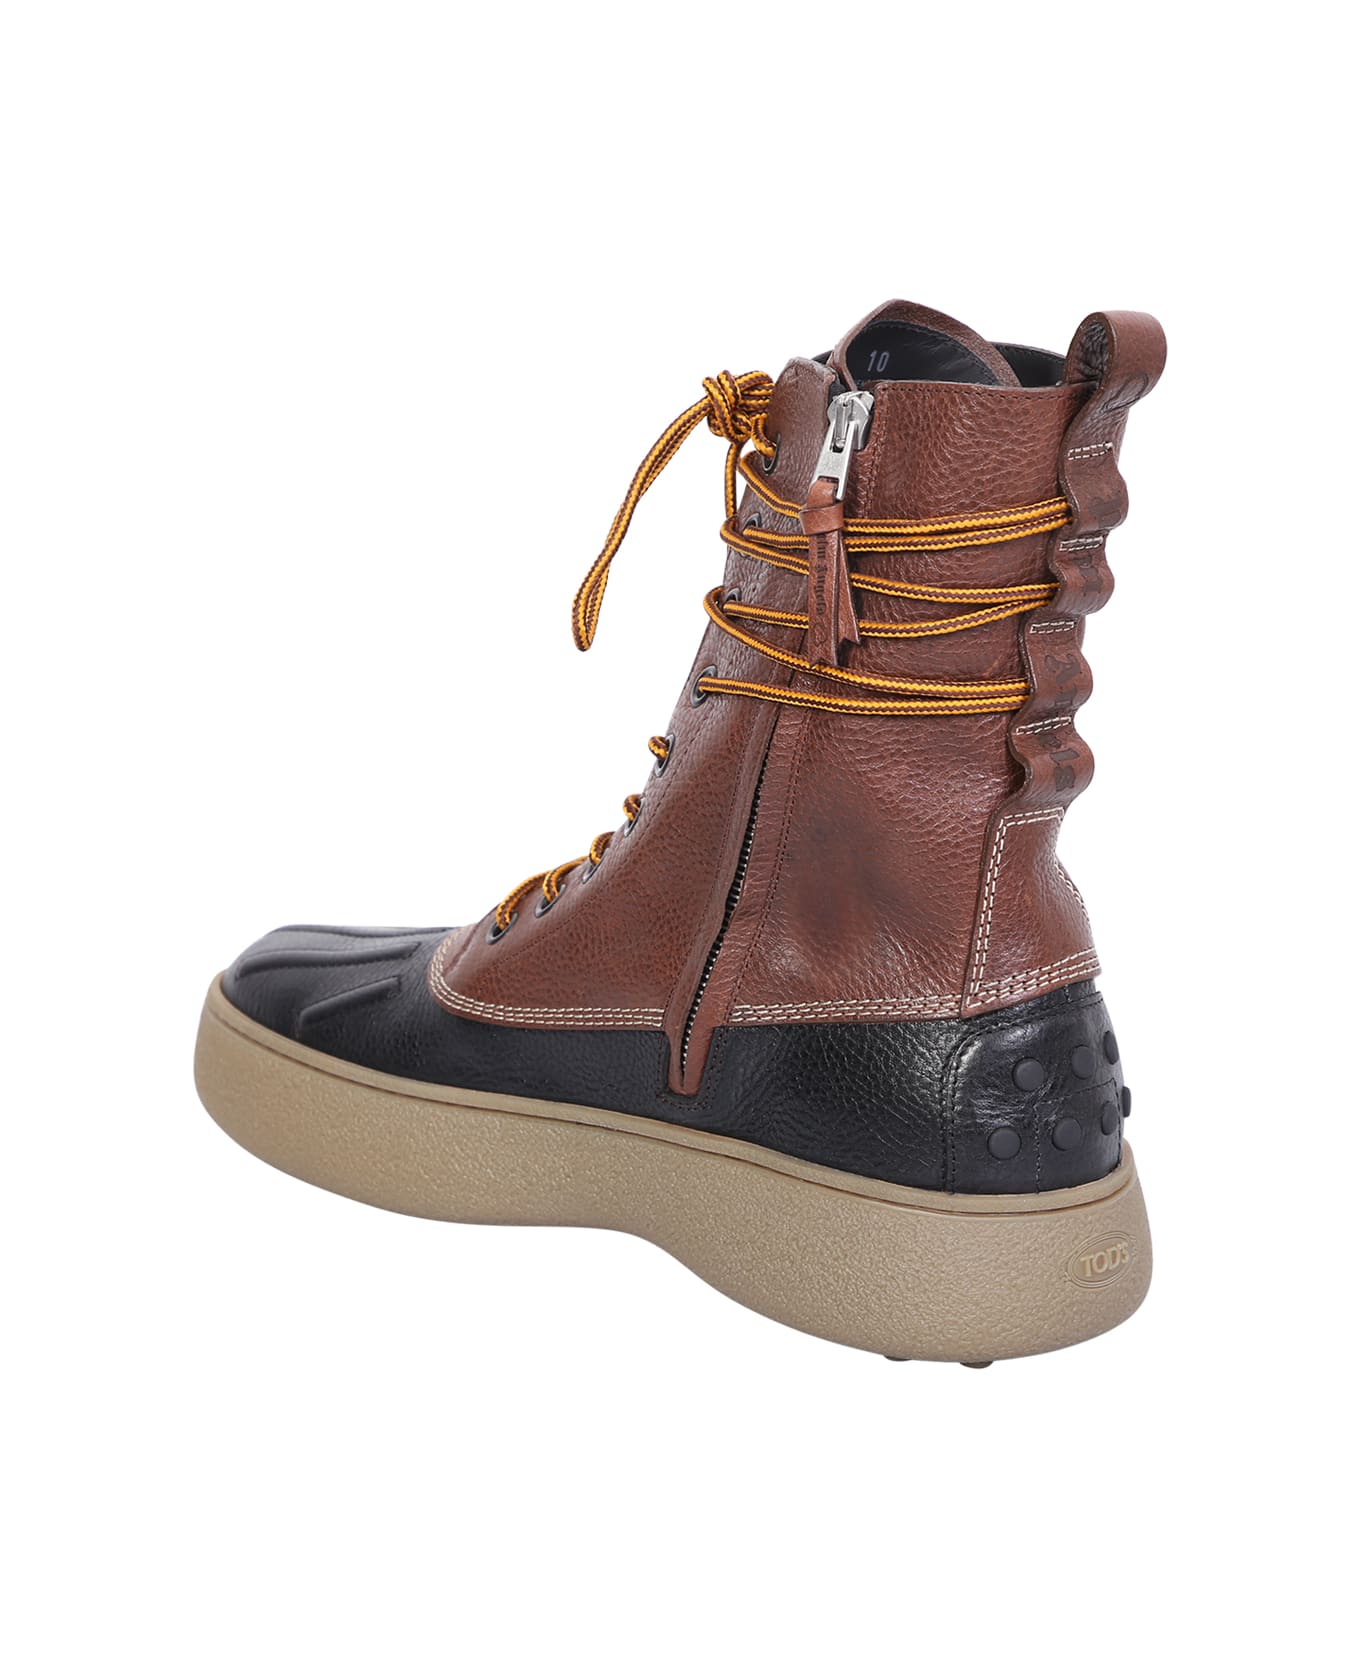 Moncler Genius Winter Gommino Leather Boots - Brown ブーツ